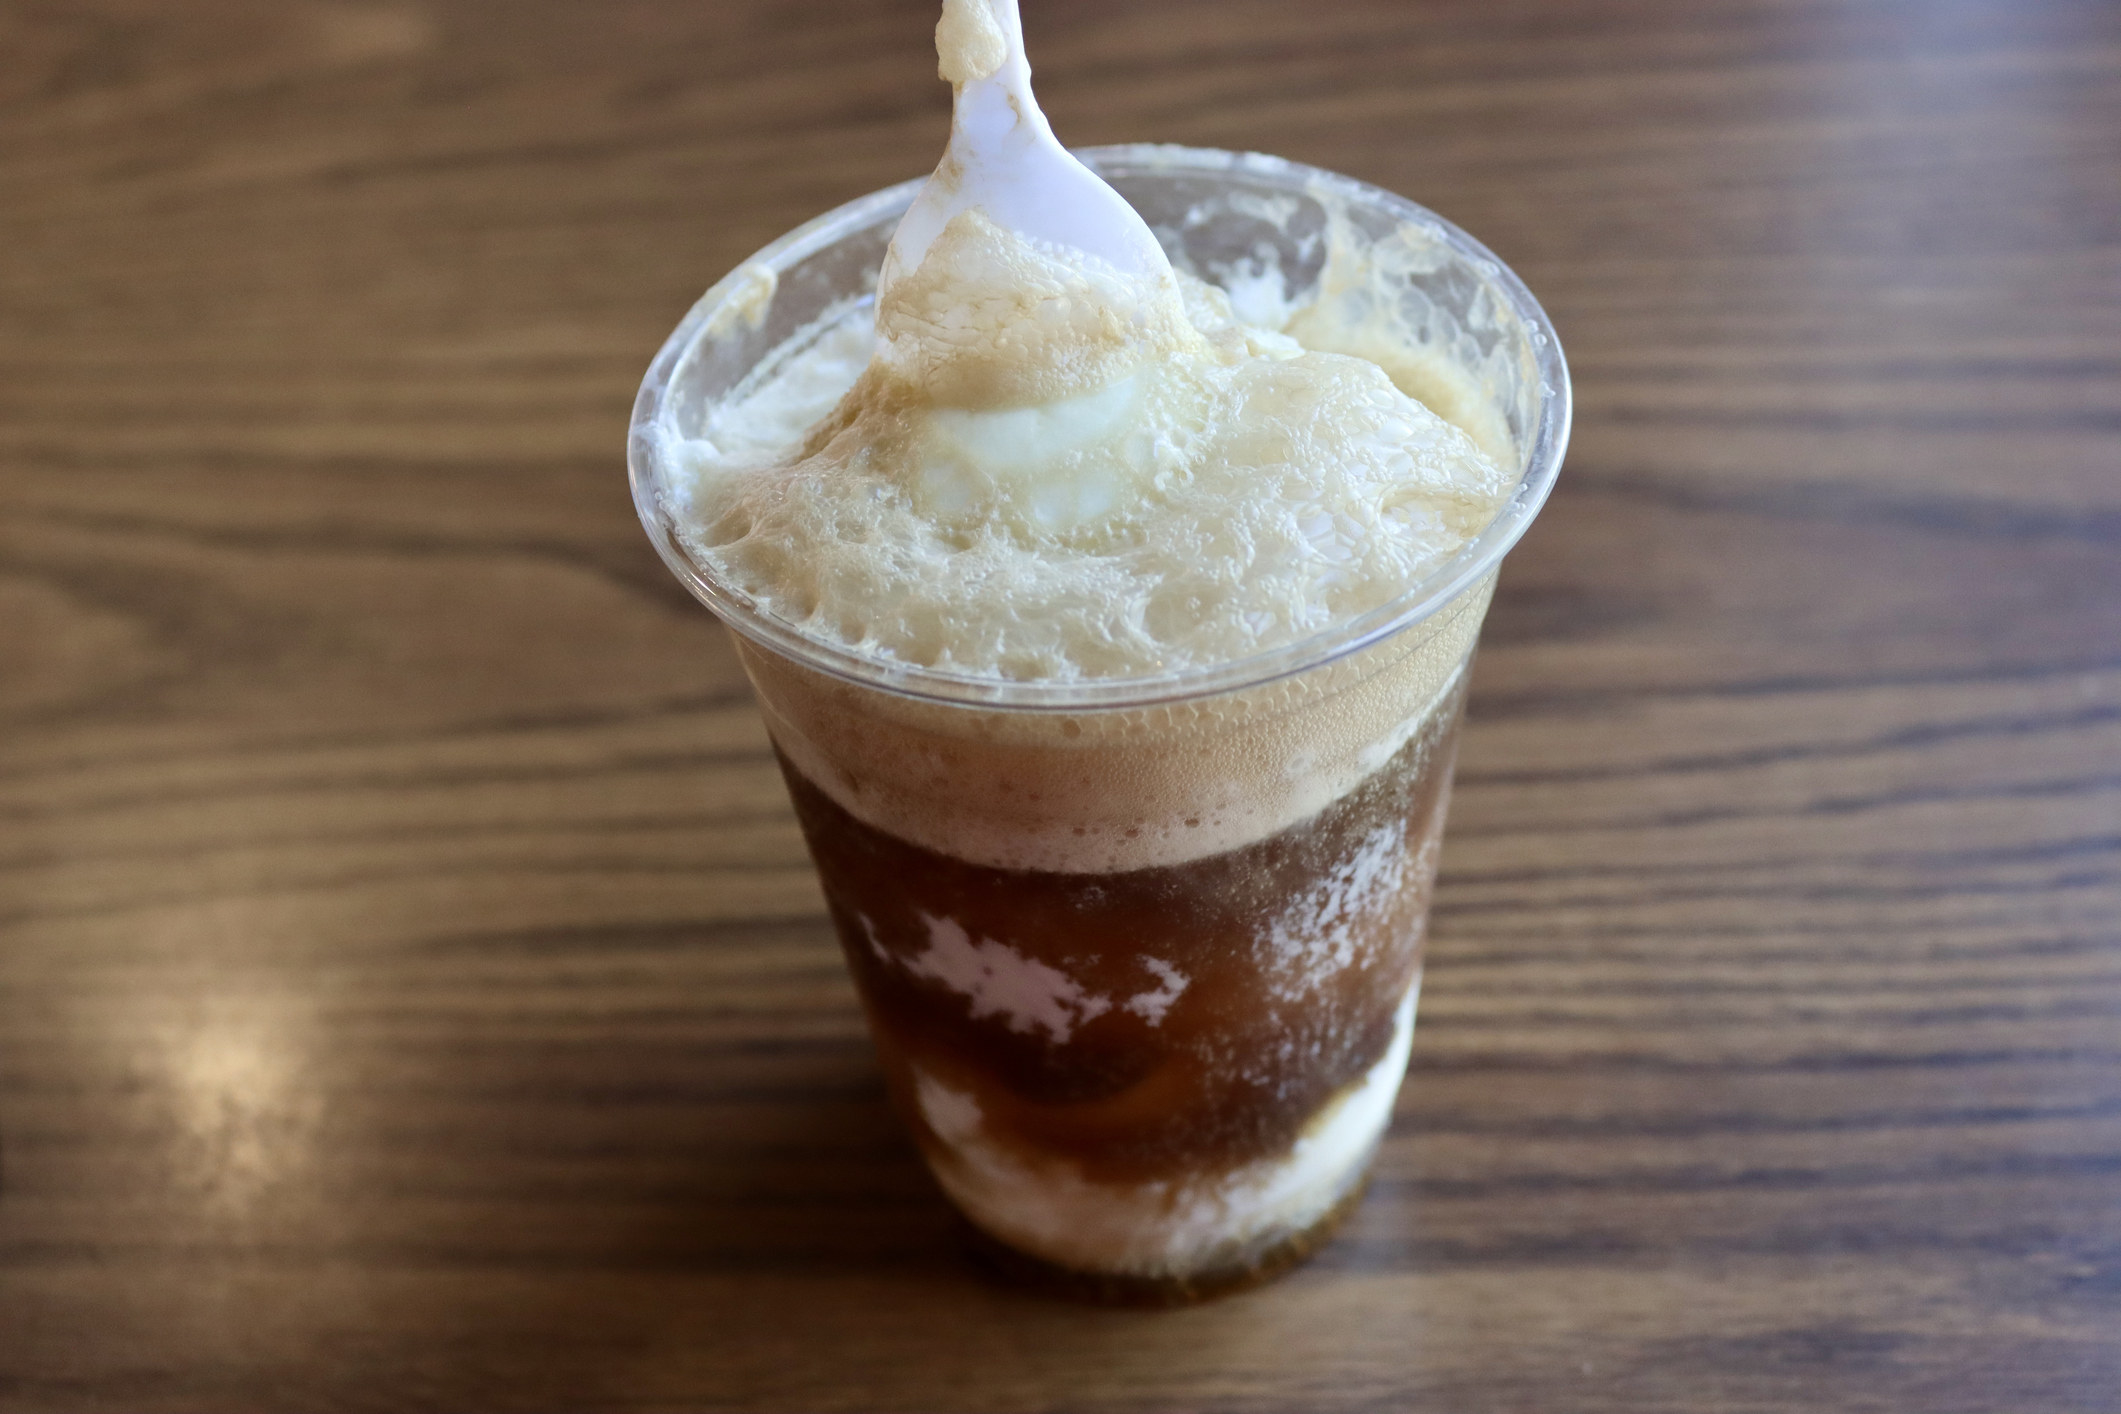 A root beer float in a plastic cup.